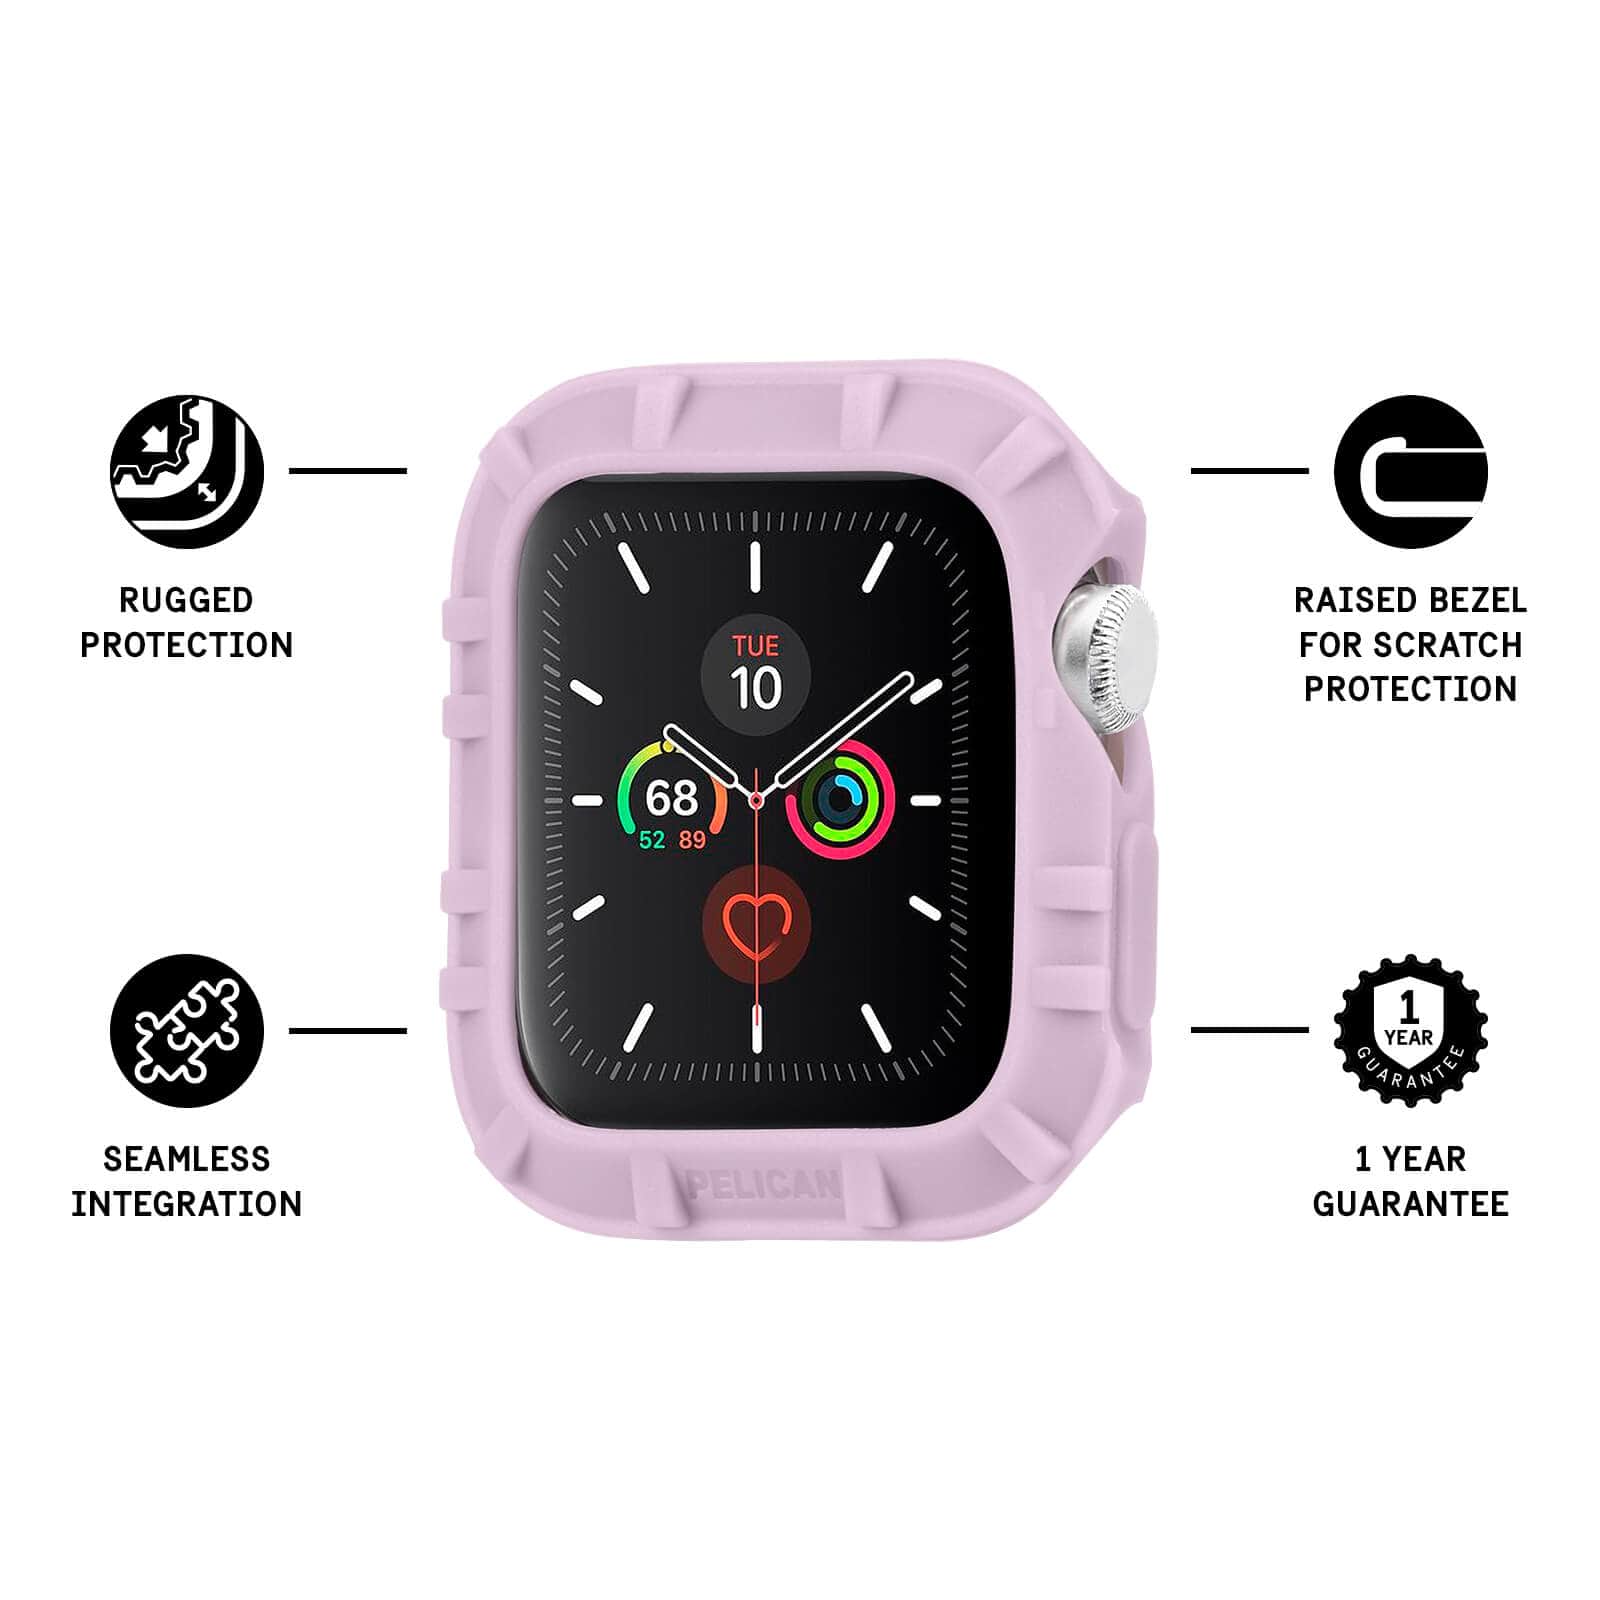 Features Rugged Protection, Seamless Integration, Raised Bezel for Scratch Protection, 1 year guarantee. color::Mauve